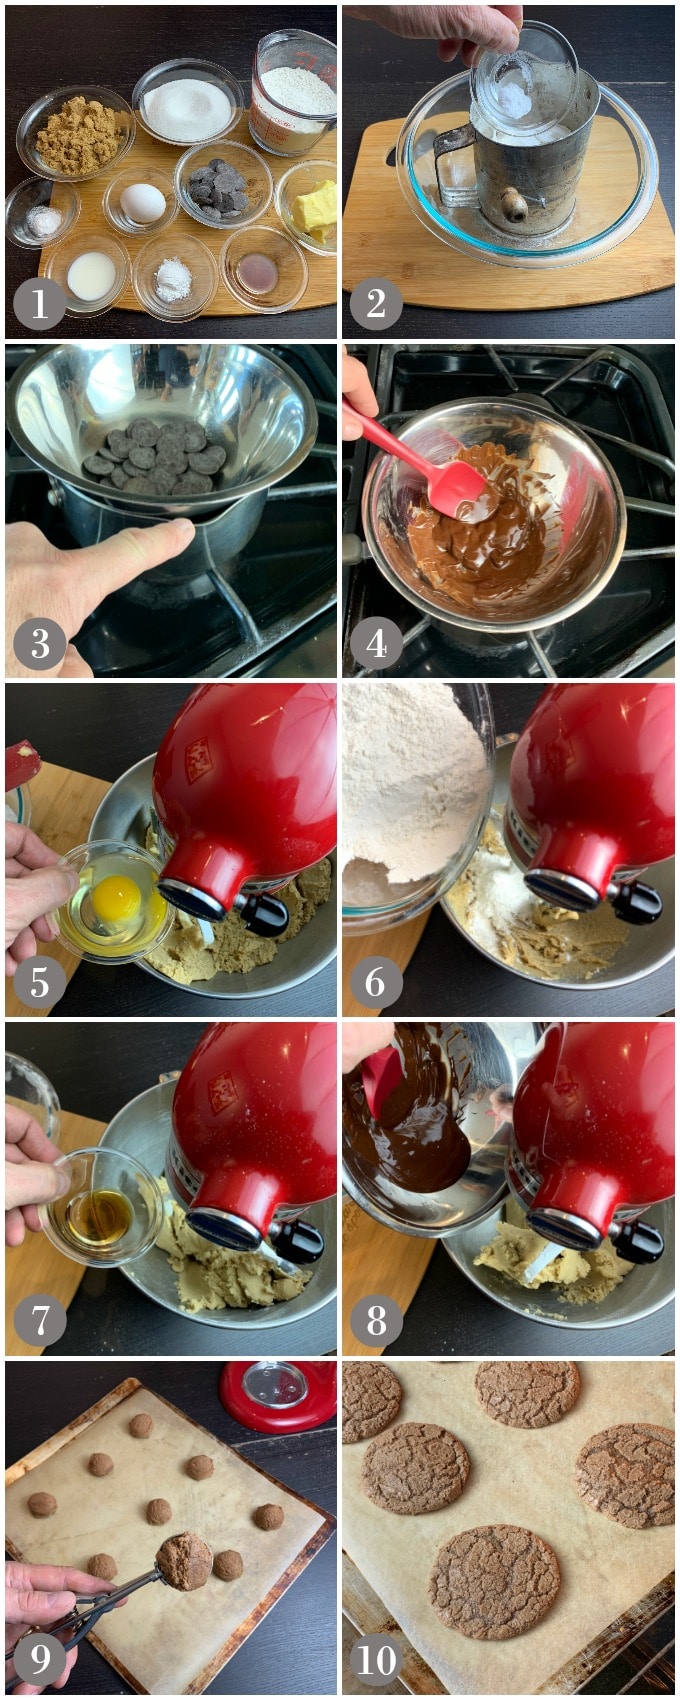 A collage of photos showing the ingredients and step to mix and bake chocolate drop cookies.